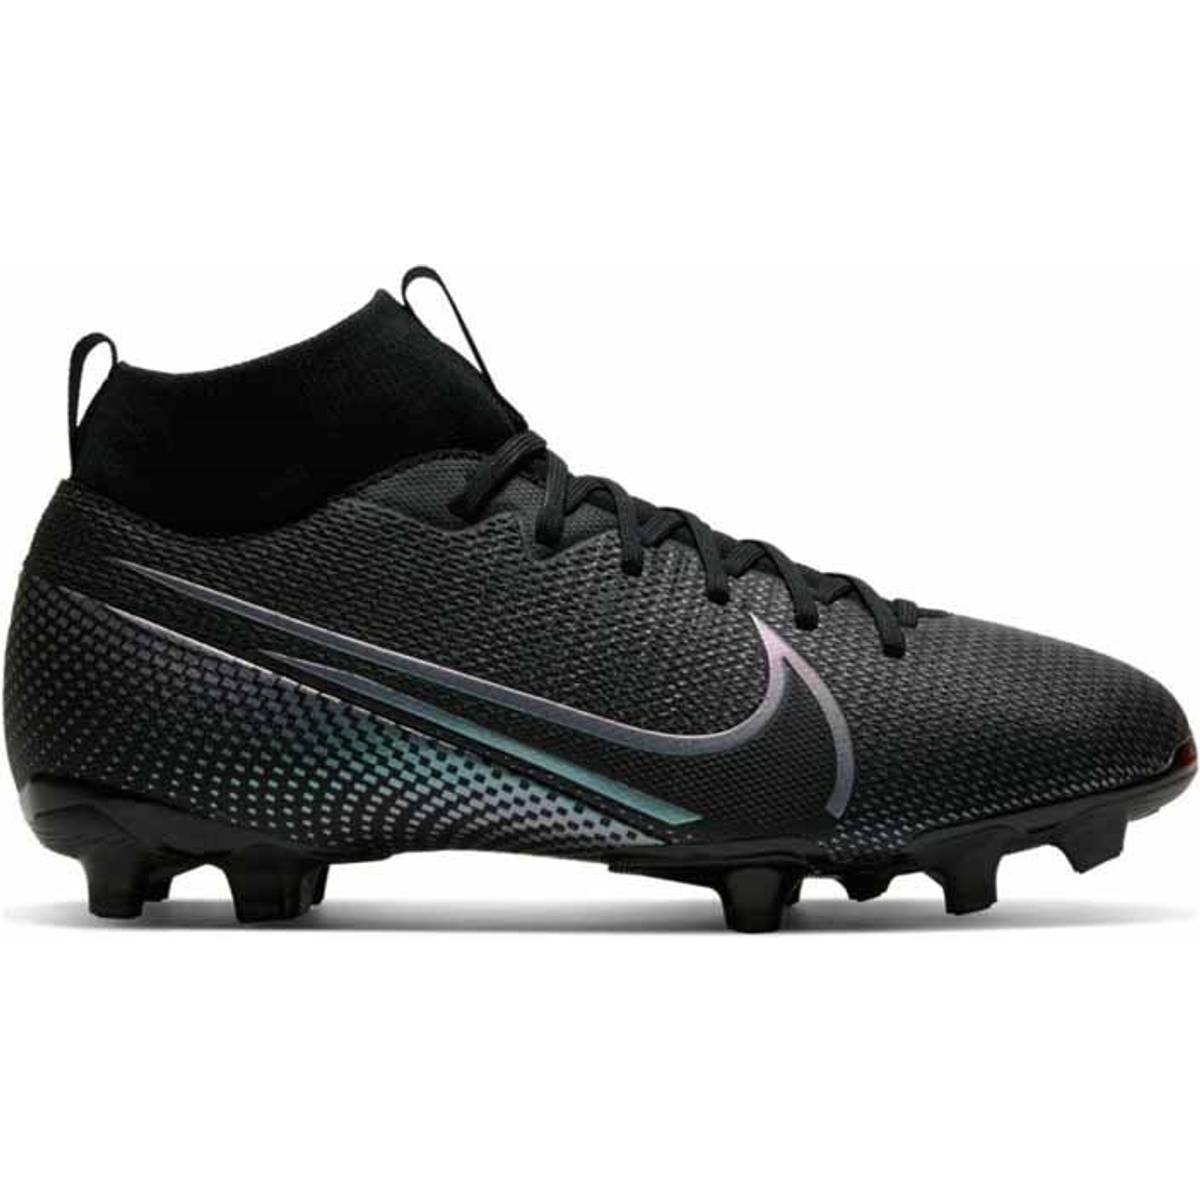 Welcome To The Official Nike Mercurial Superfly Vi Elite CR7.